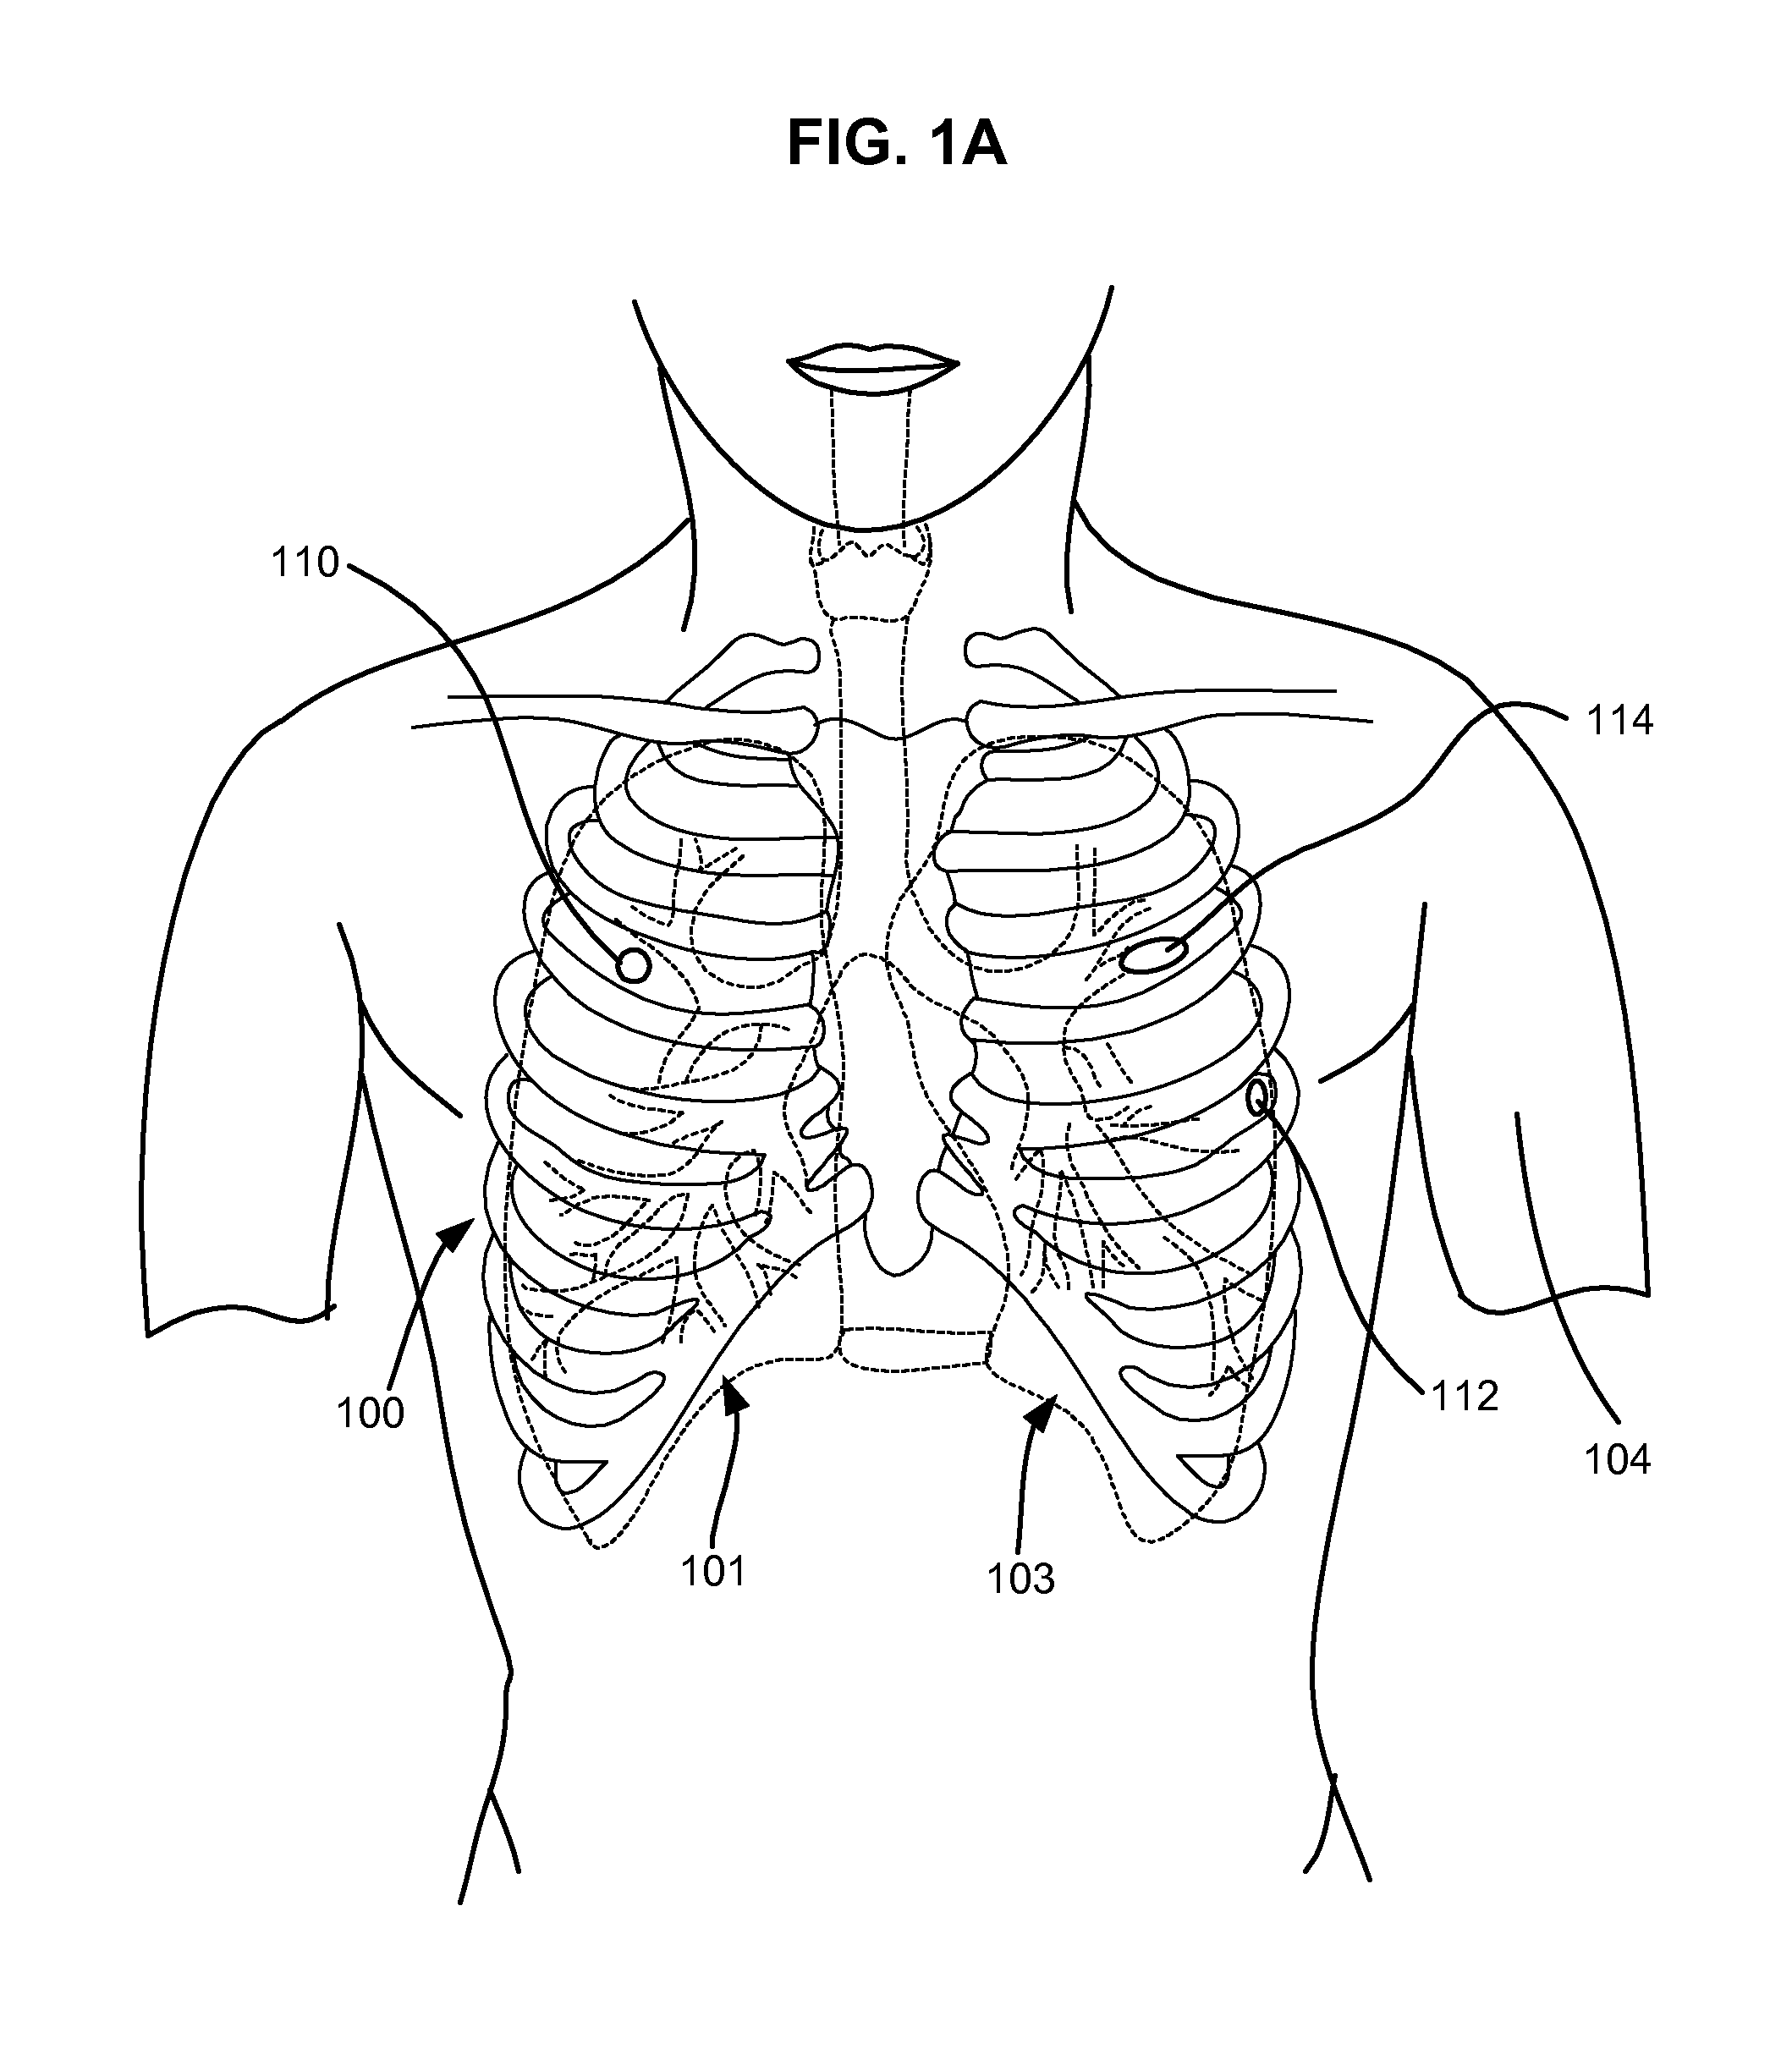 Single-phase surgical procedure for creating a pneumostoma to treat chronic obstructive pulmonary disease